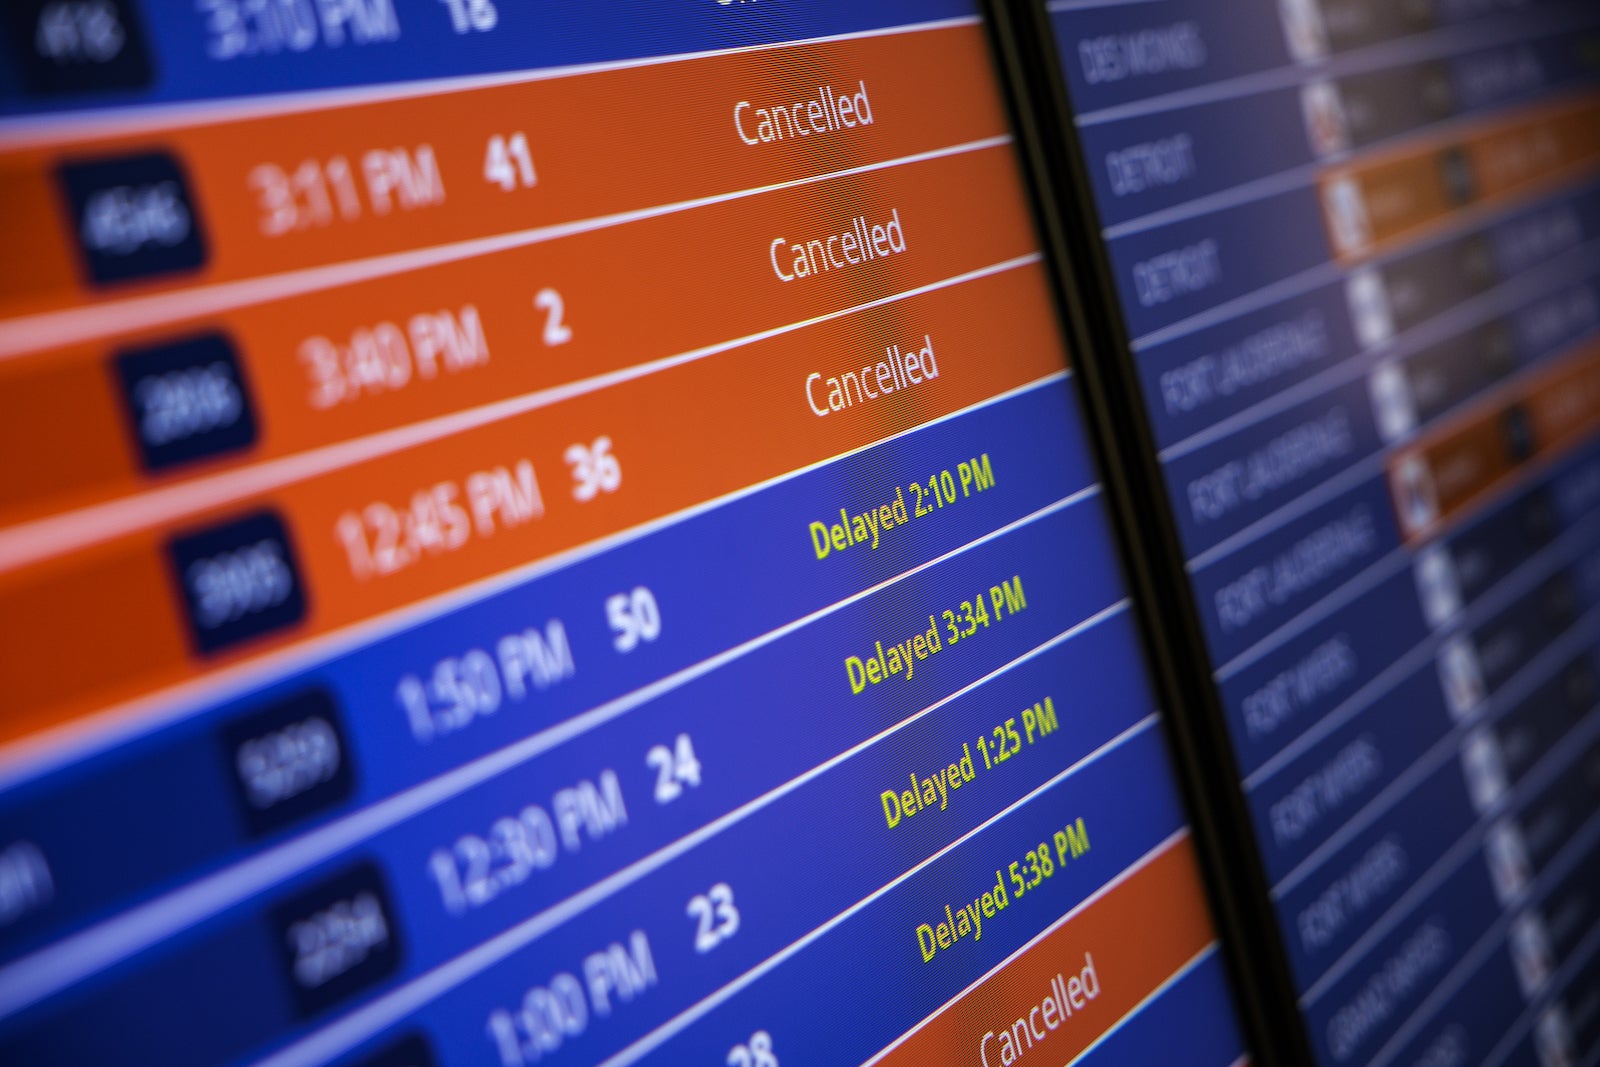 Complaints about airlines in April were 300% higher than in 2019